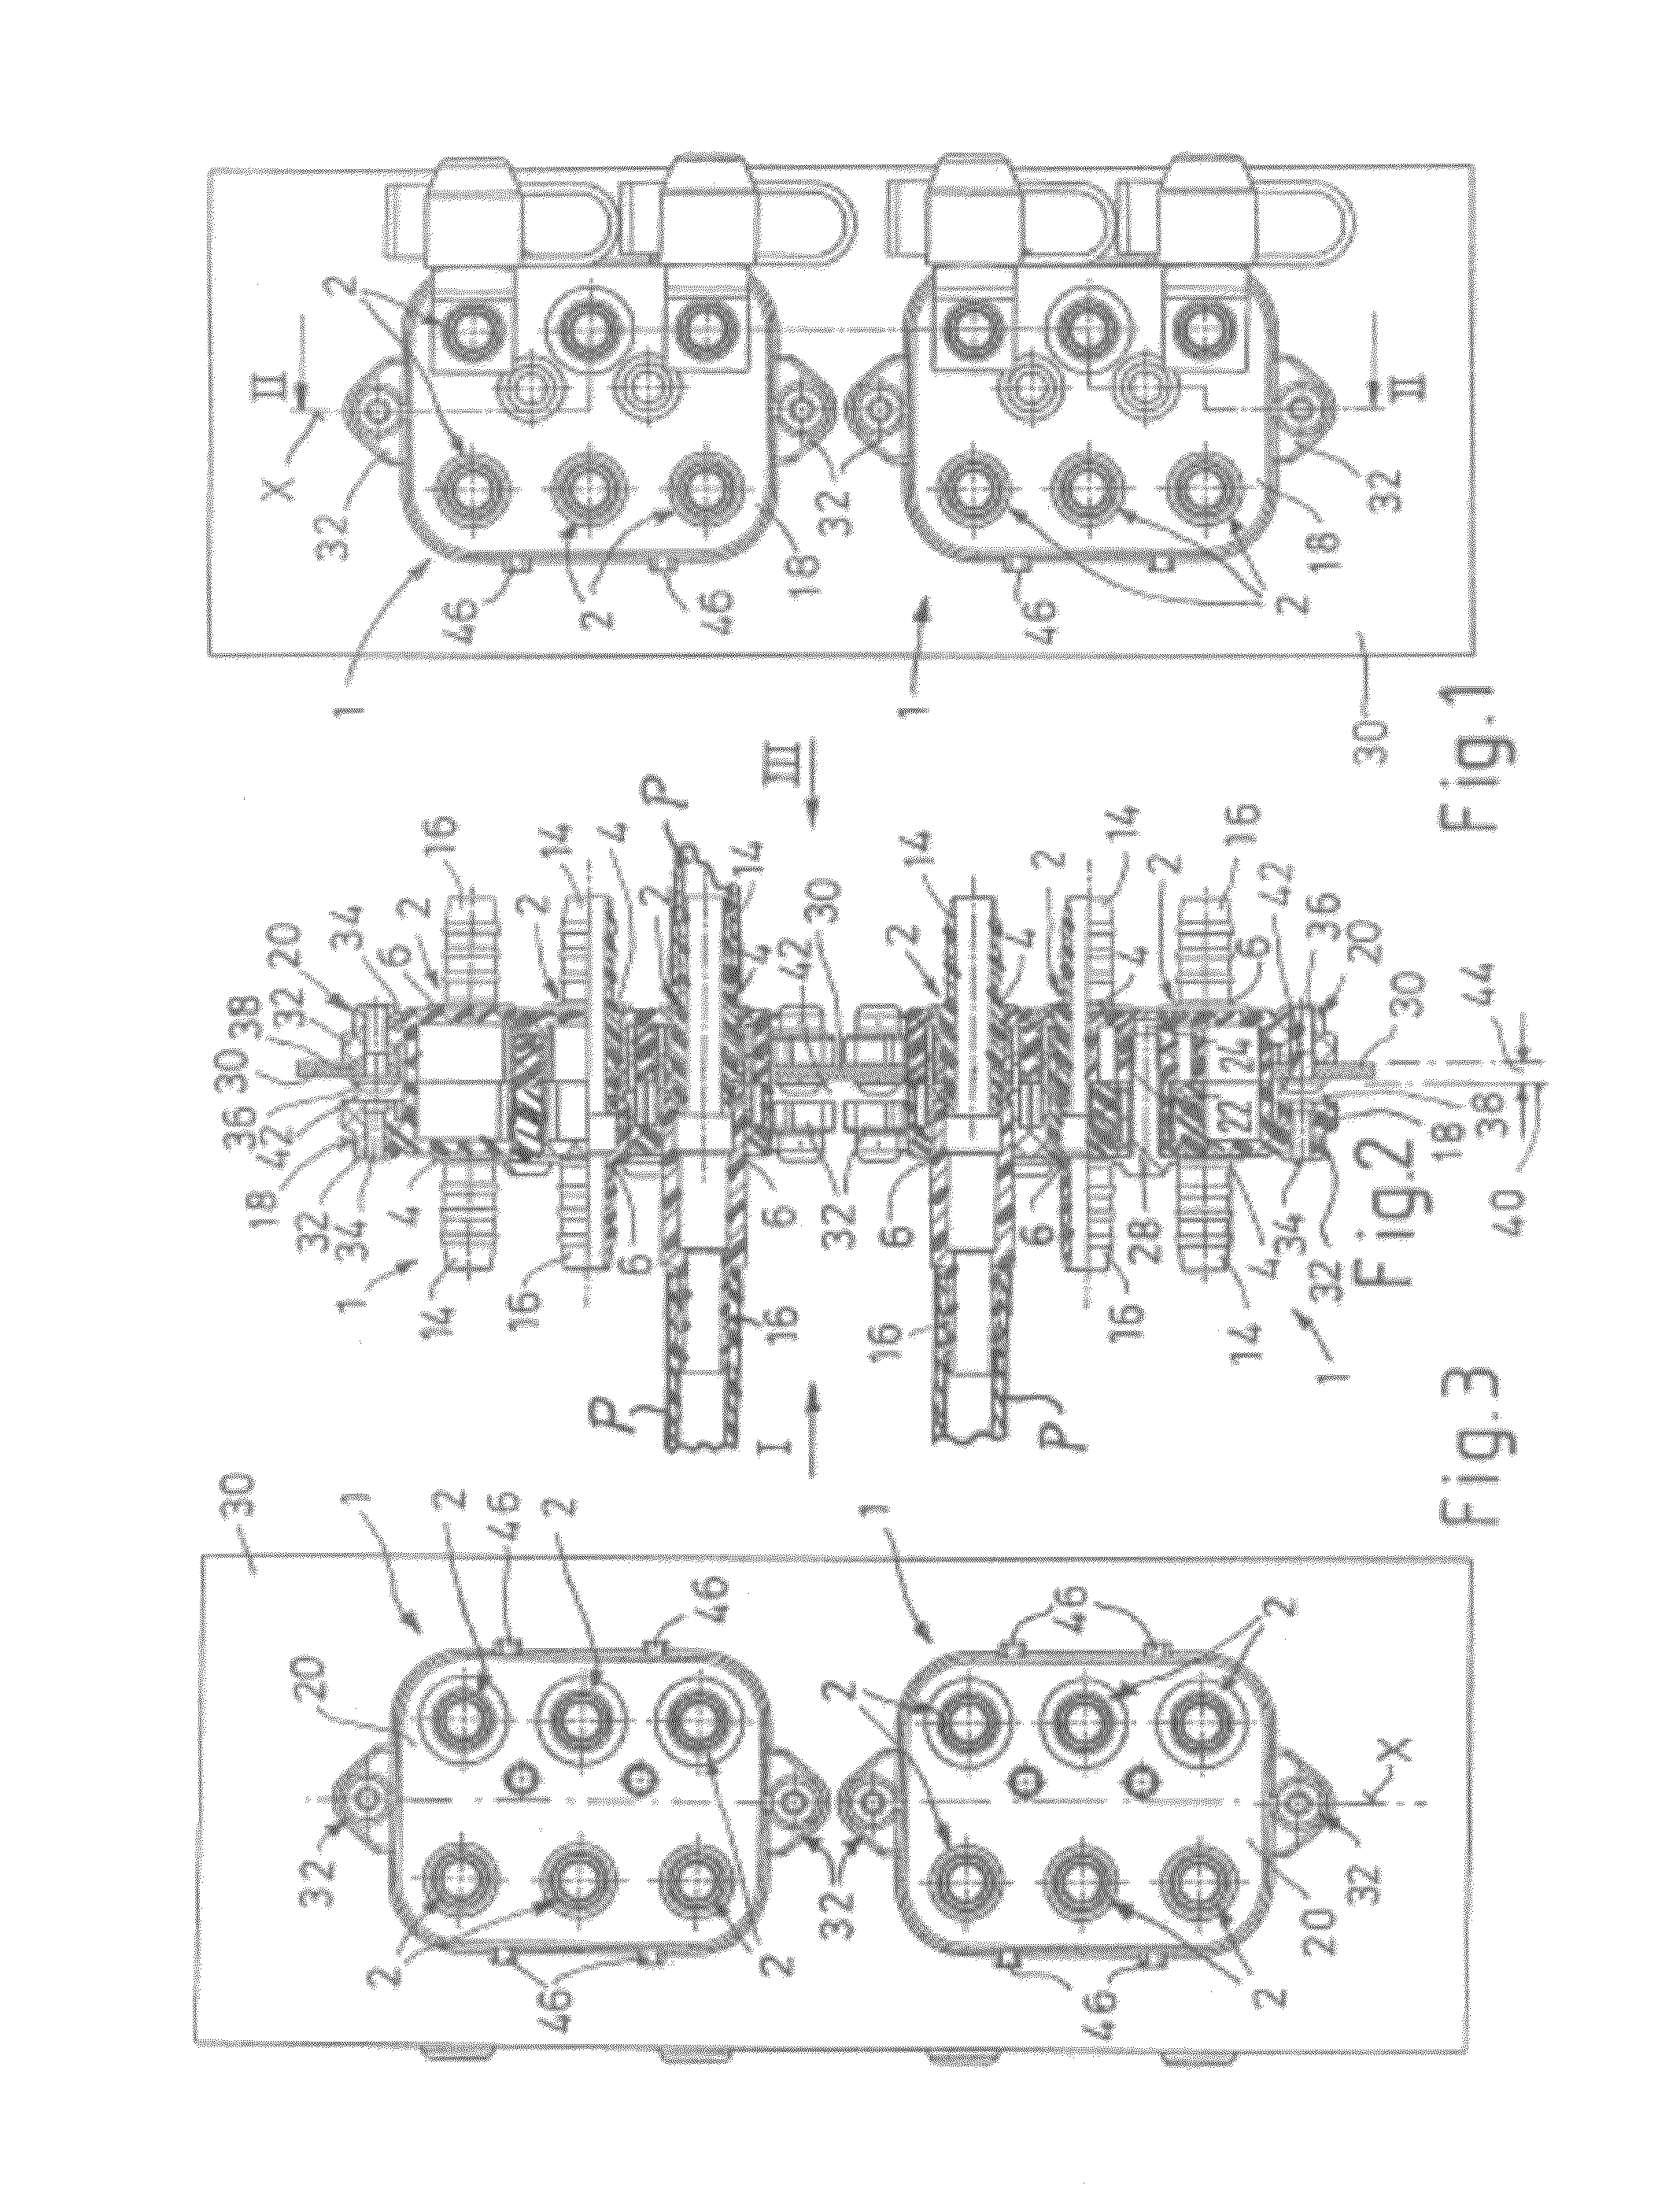 Coupling device for media conduits